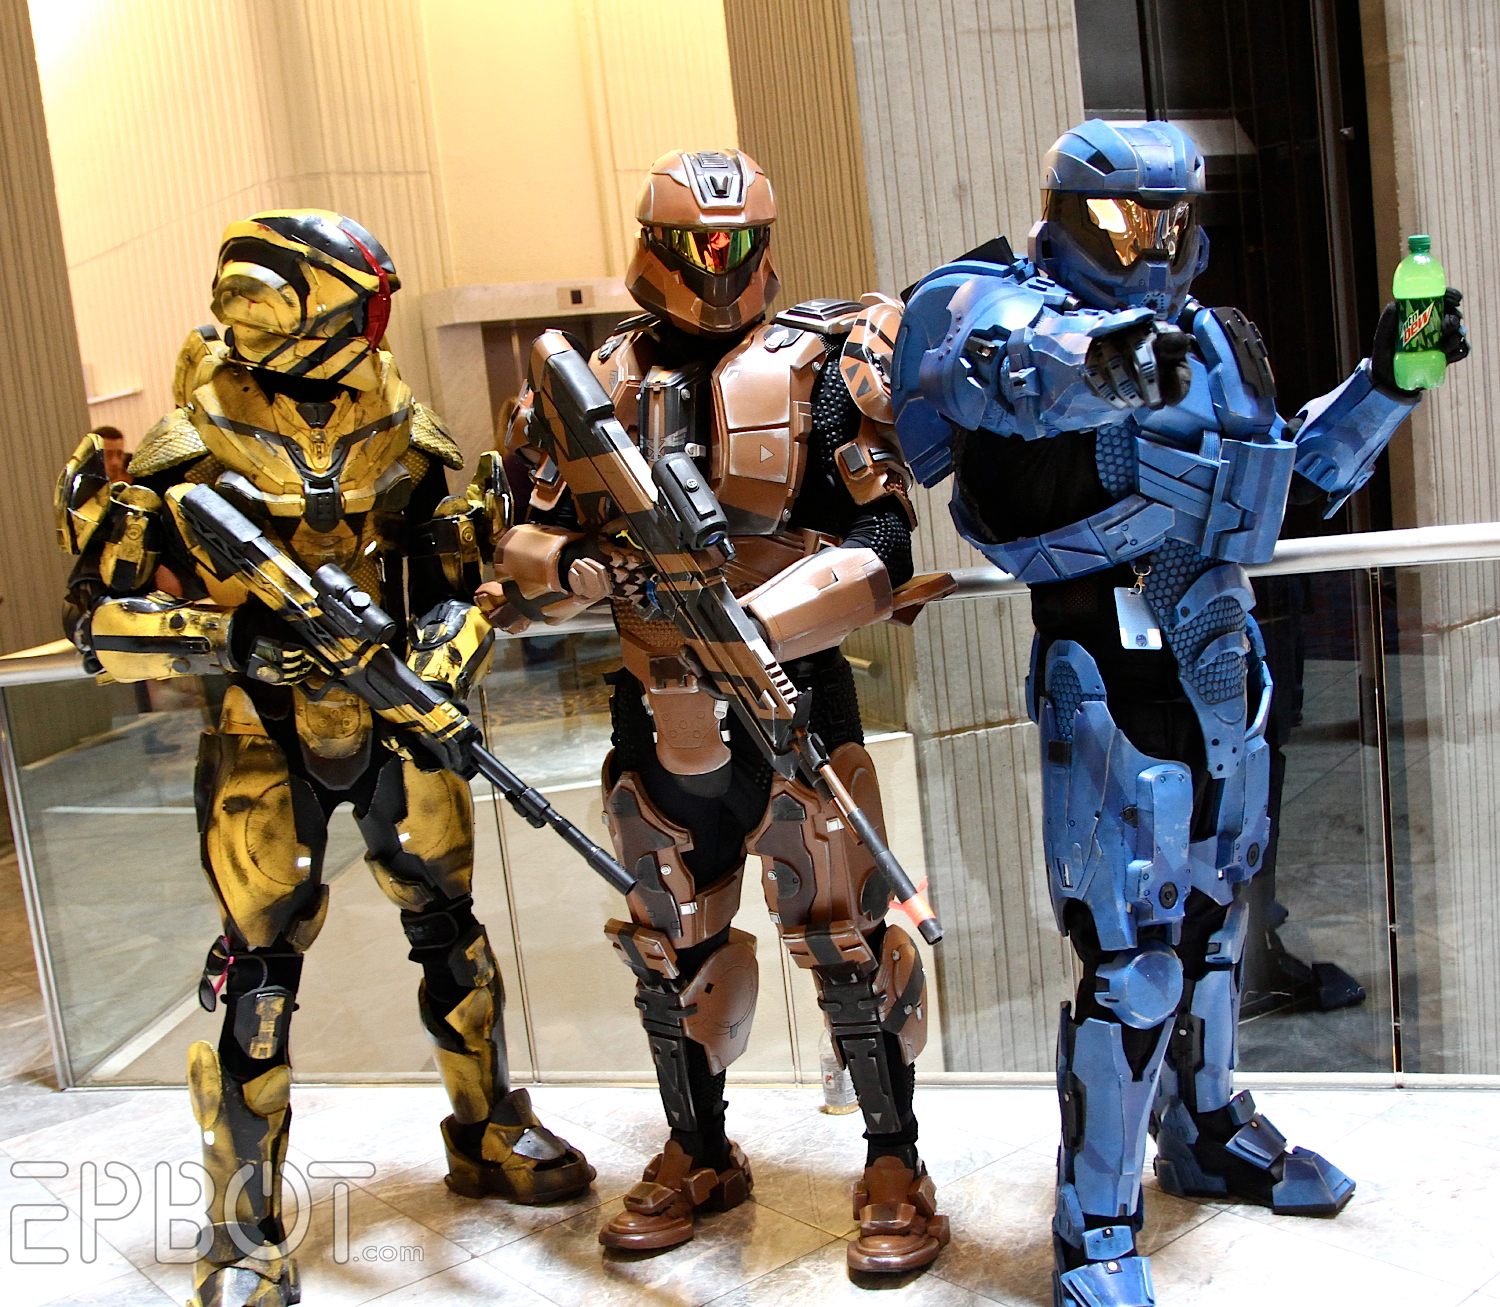 EPBOT: Dragon Con '13: The Best Cosplay, Part 1